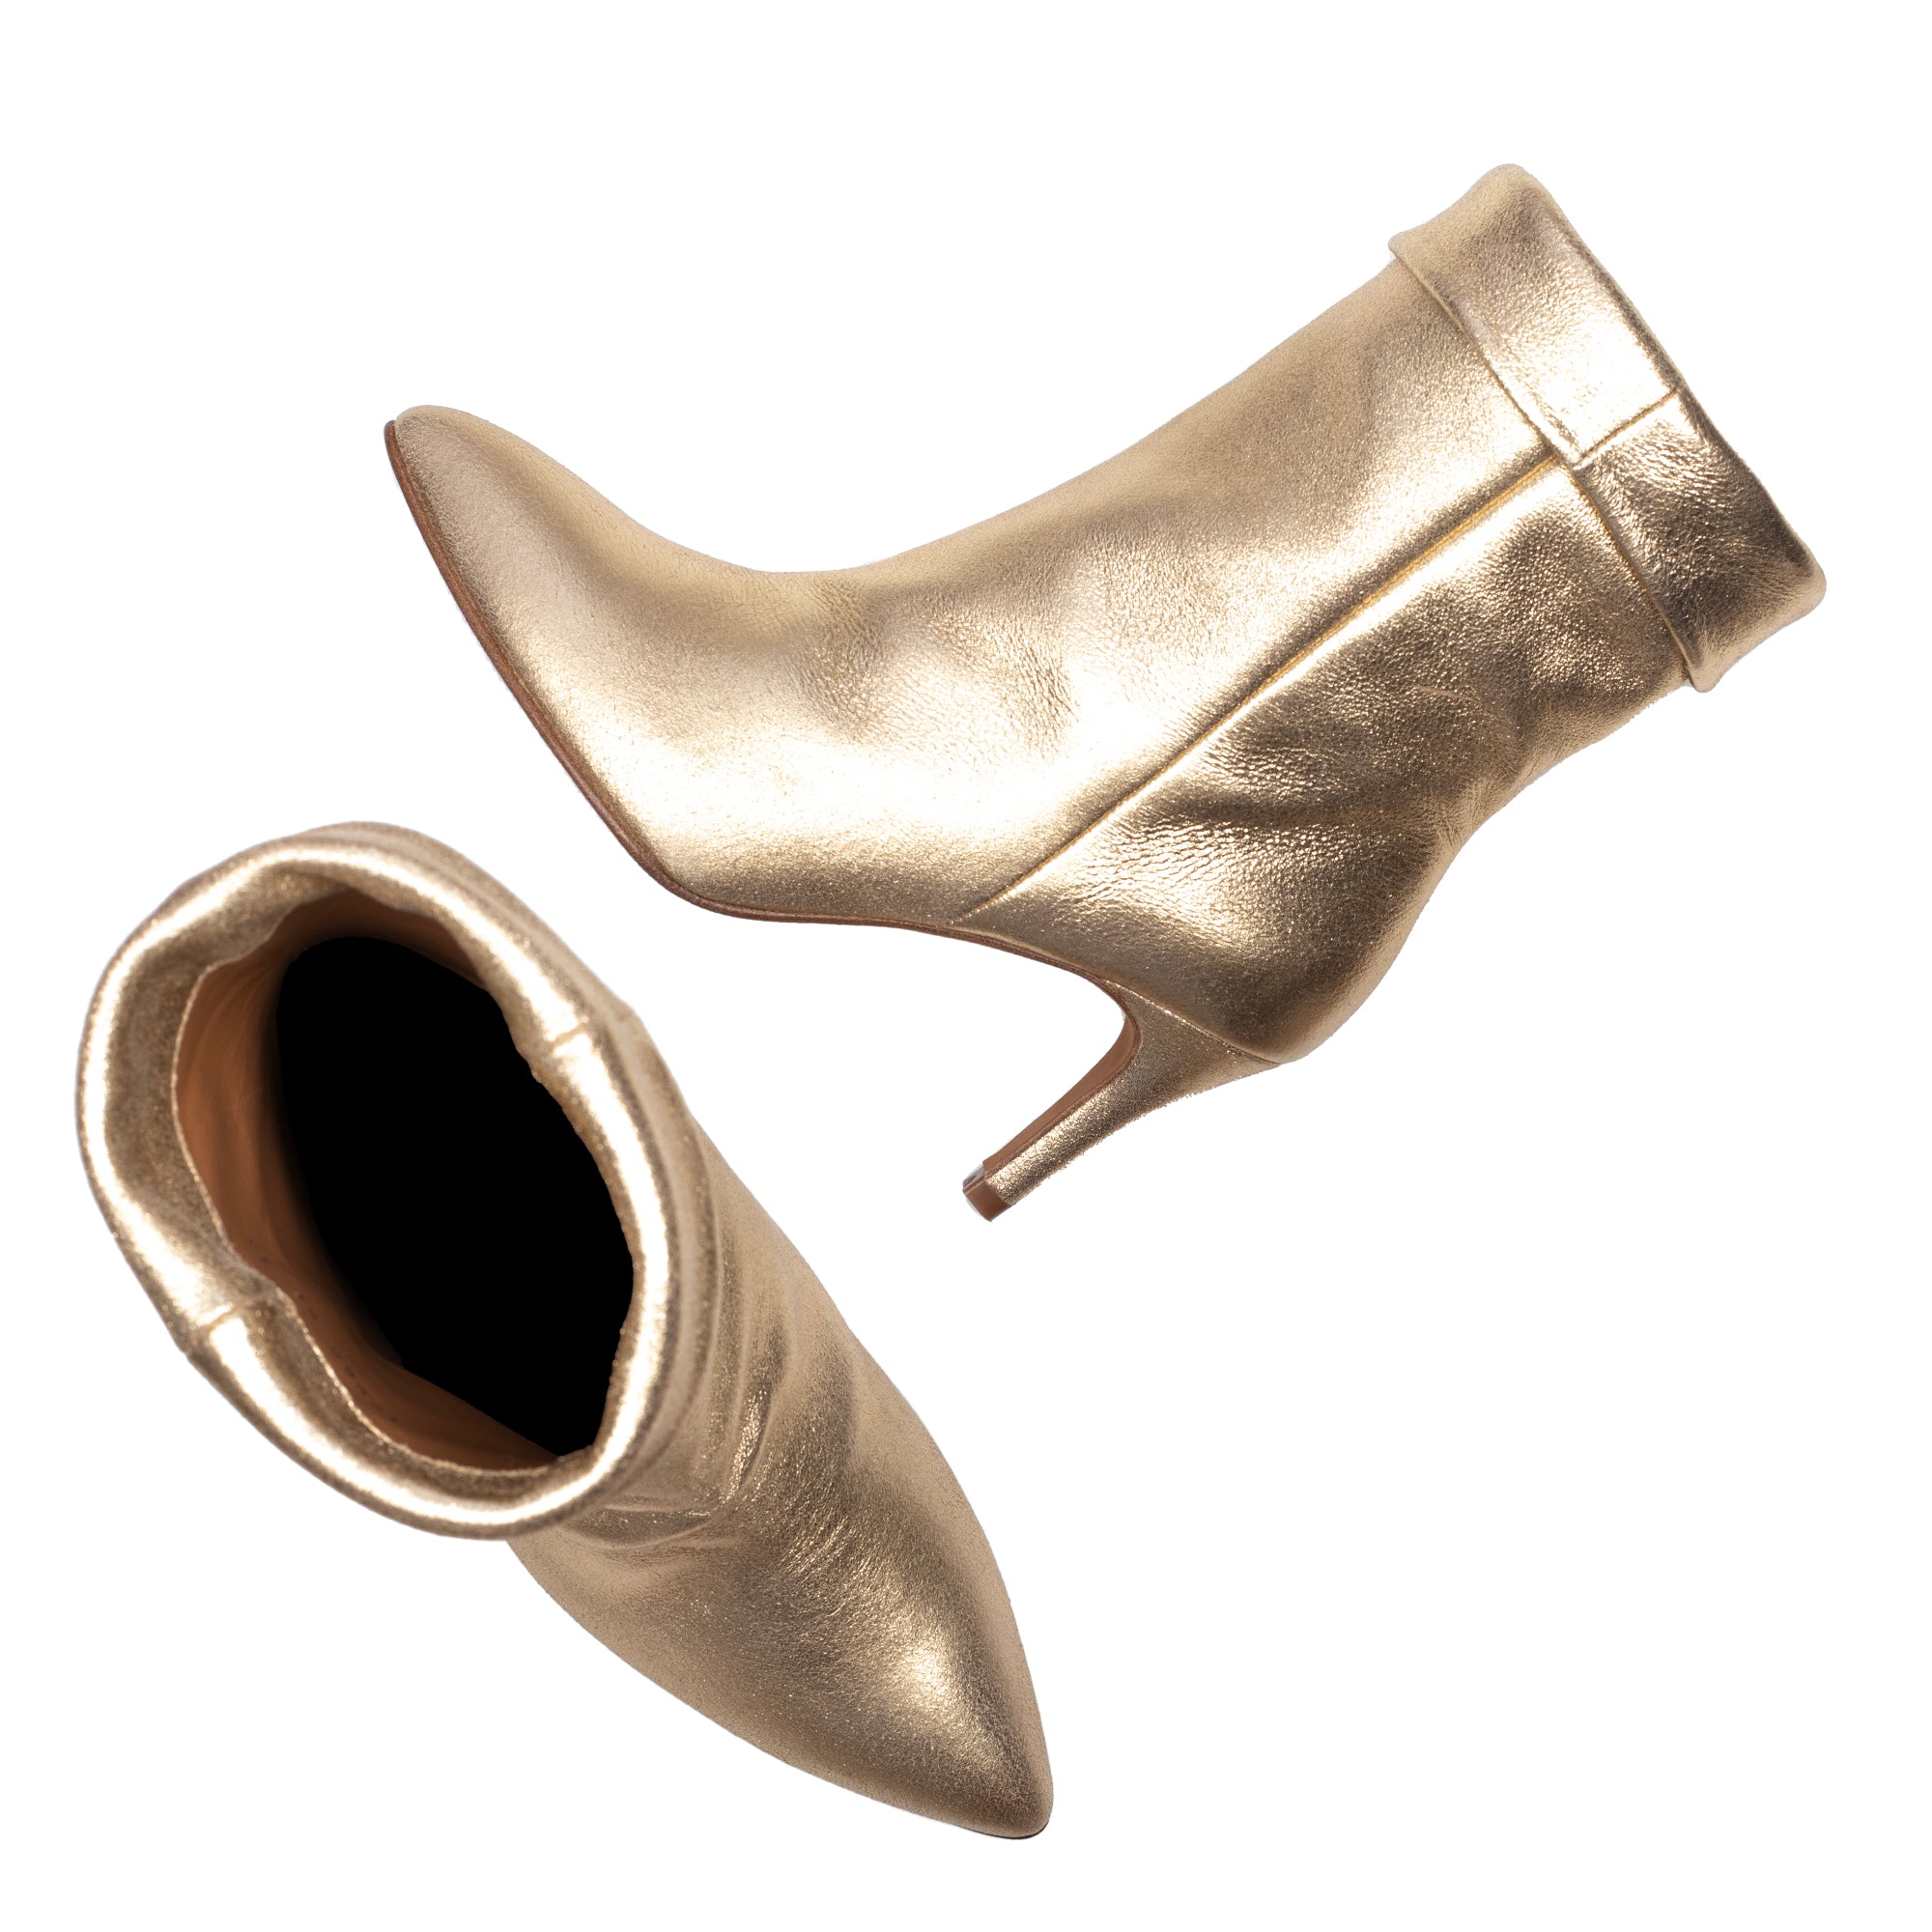 METALLIC GOLD ANKLE BOOTS